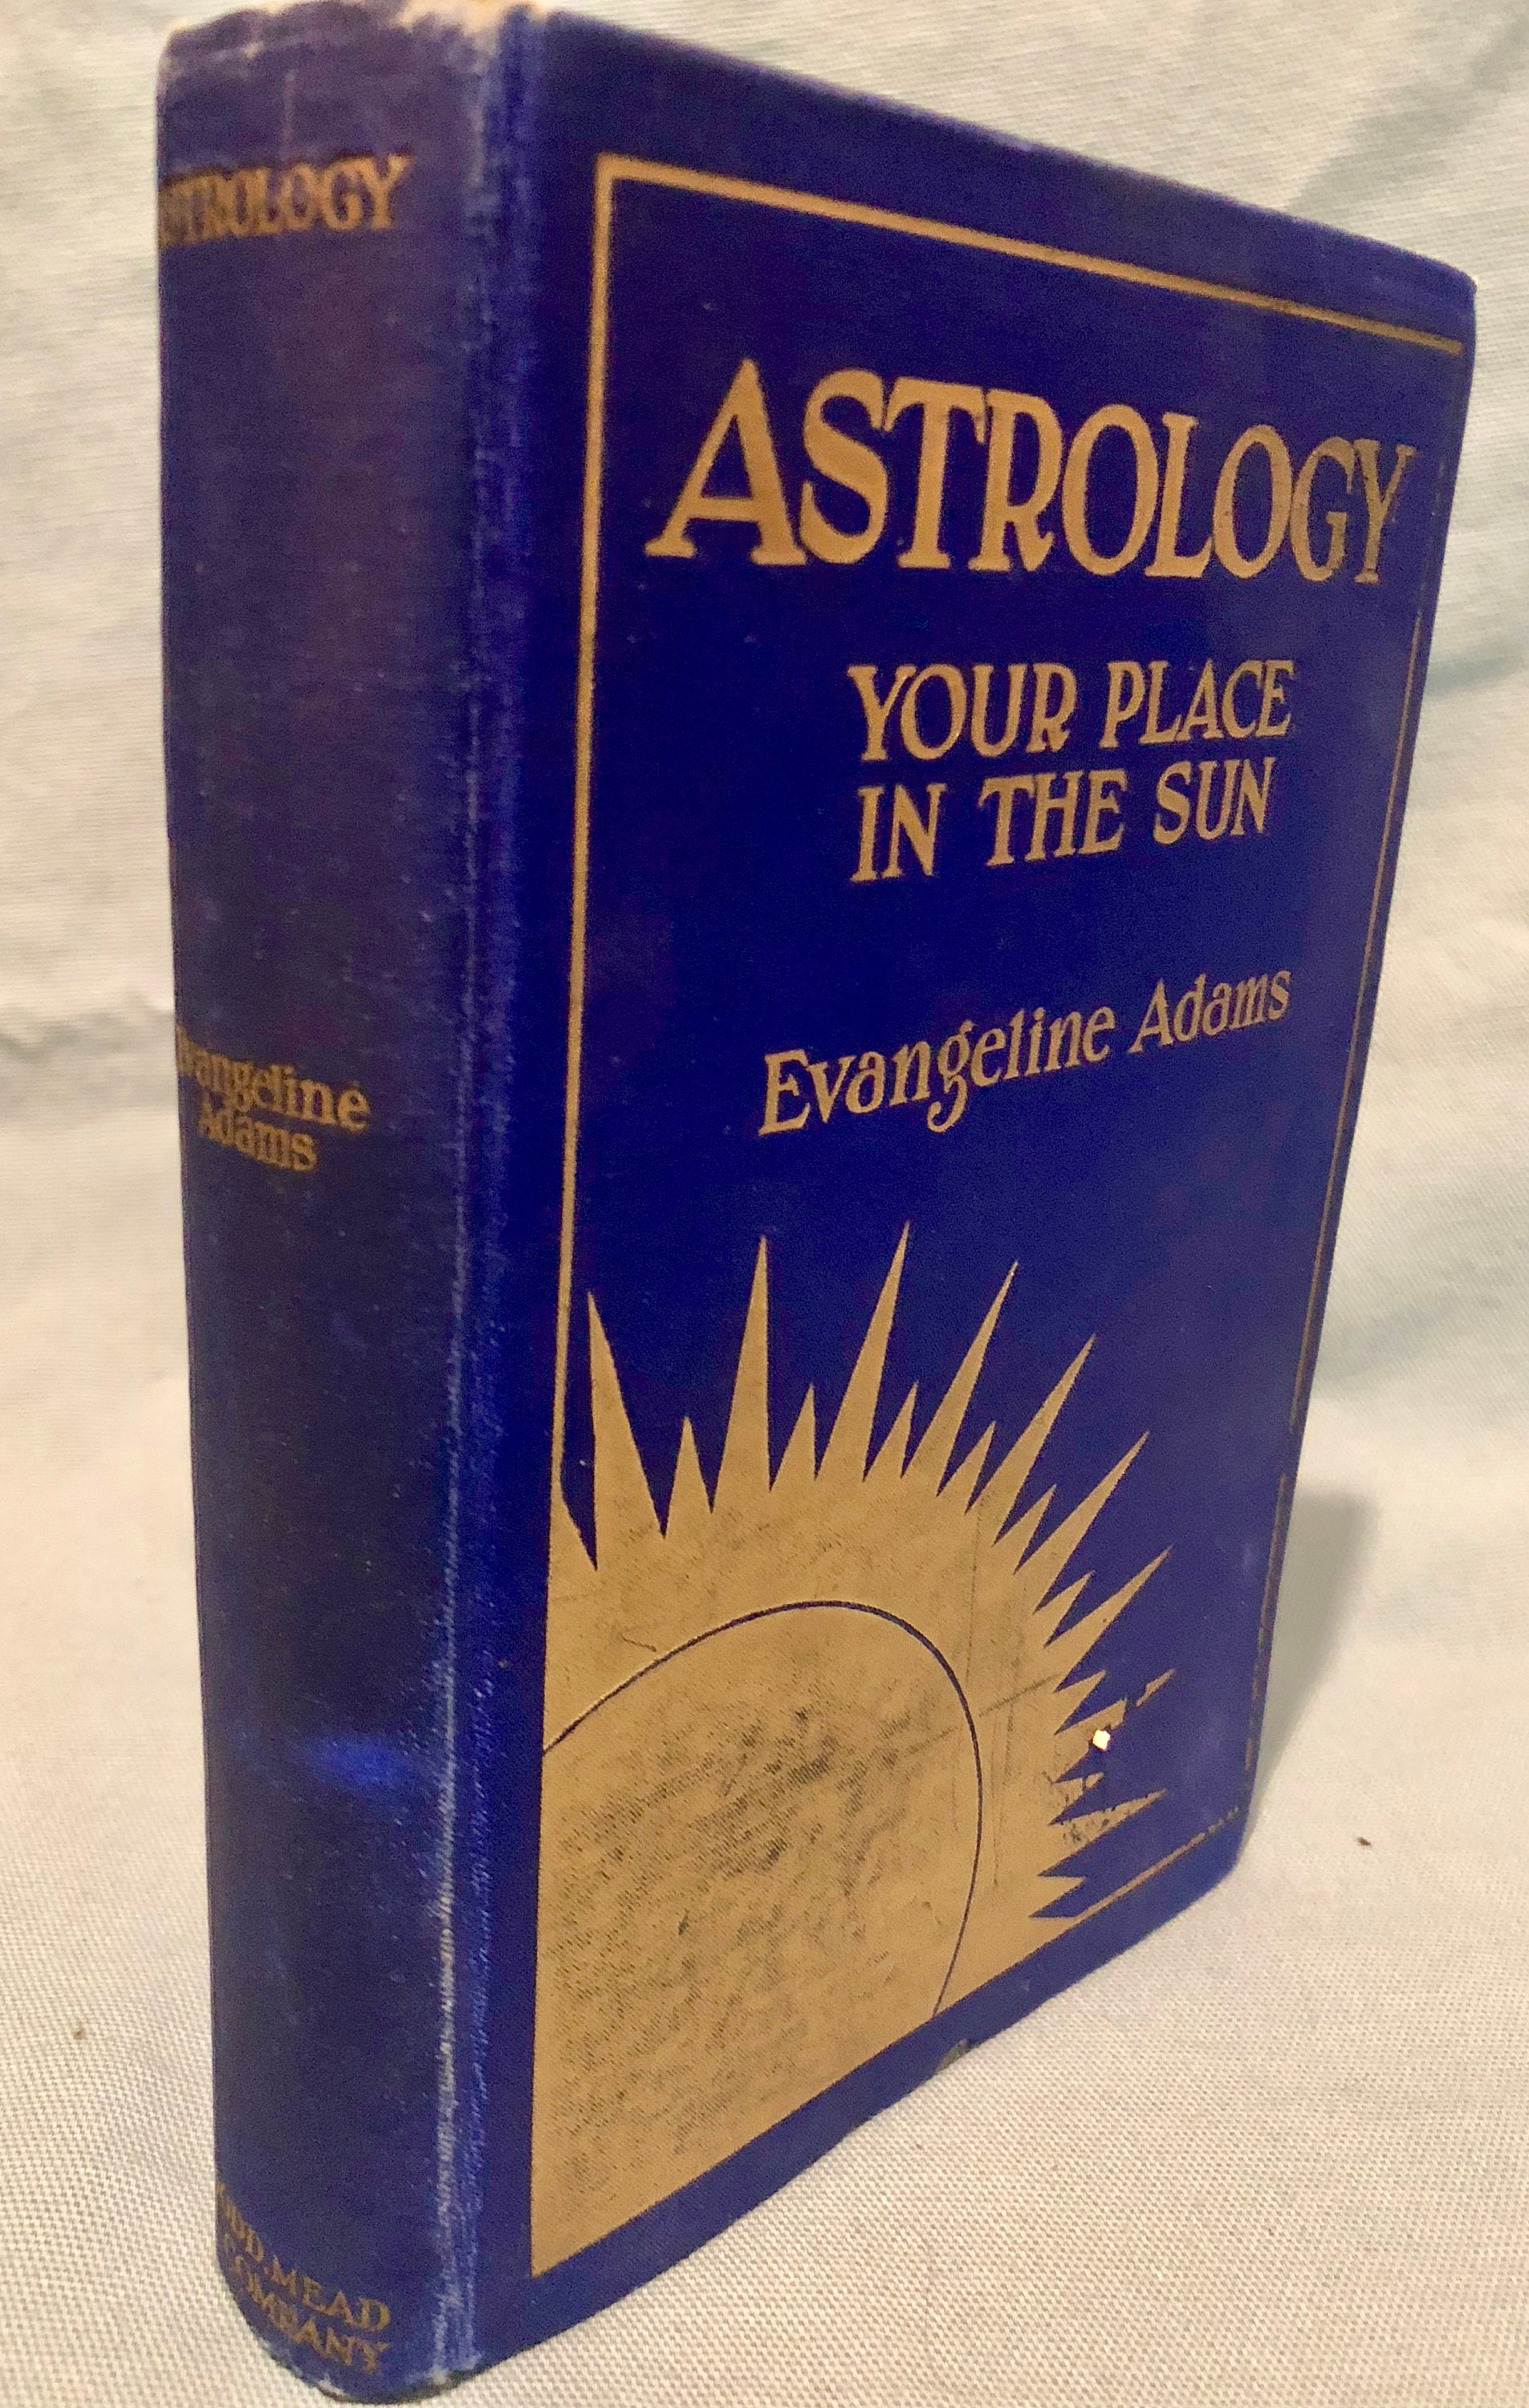 Rare Vintage 'Astrology Your Place in the Sun' by Evangeline Adams ...